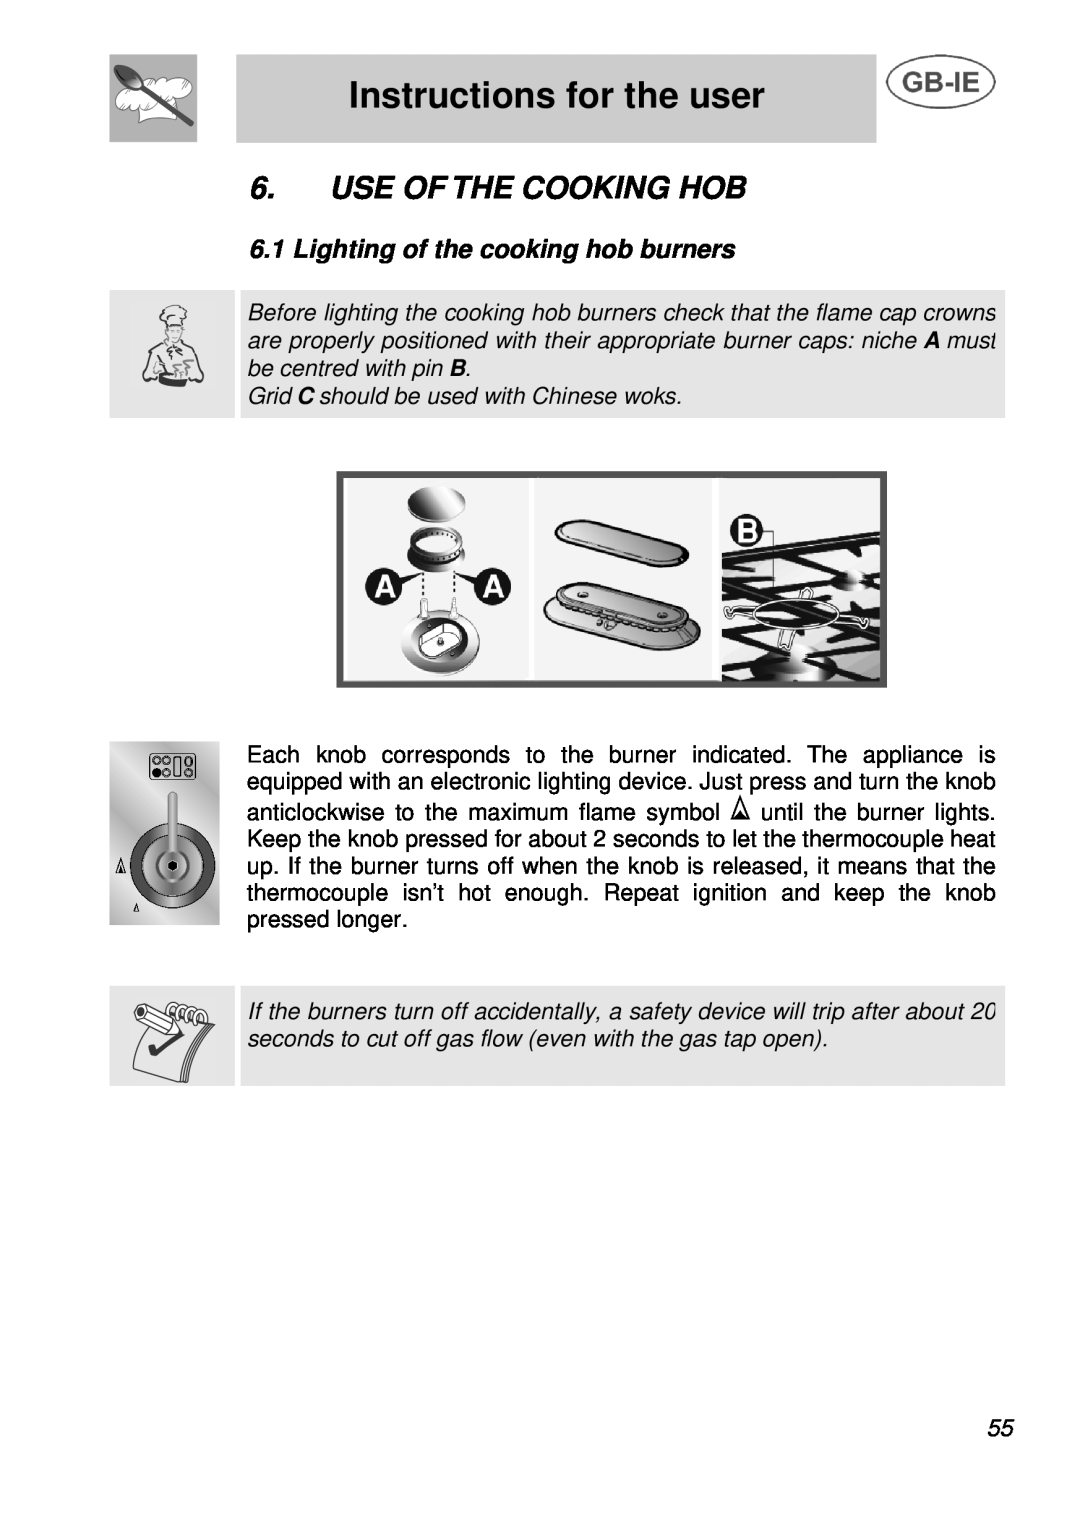 Smeg A3 manual Use Of The Cooking Hob, Lighting of the cooking hob burners, Instructions for the user 